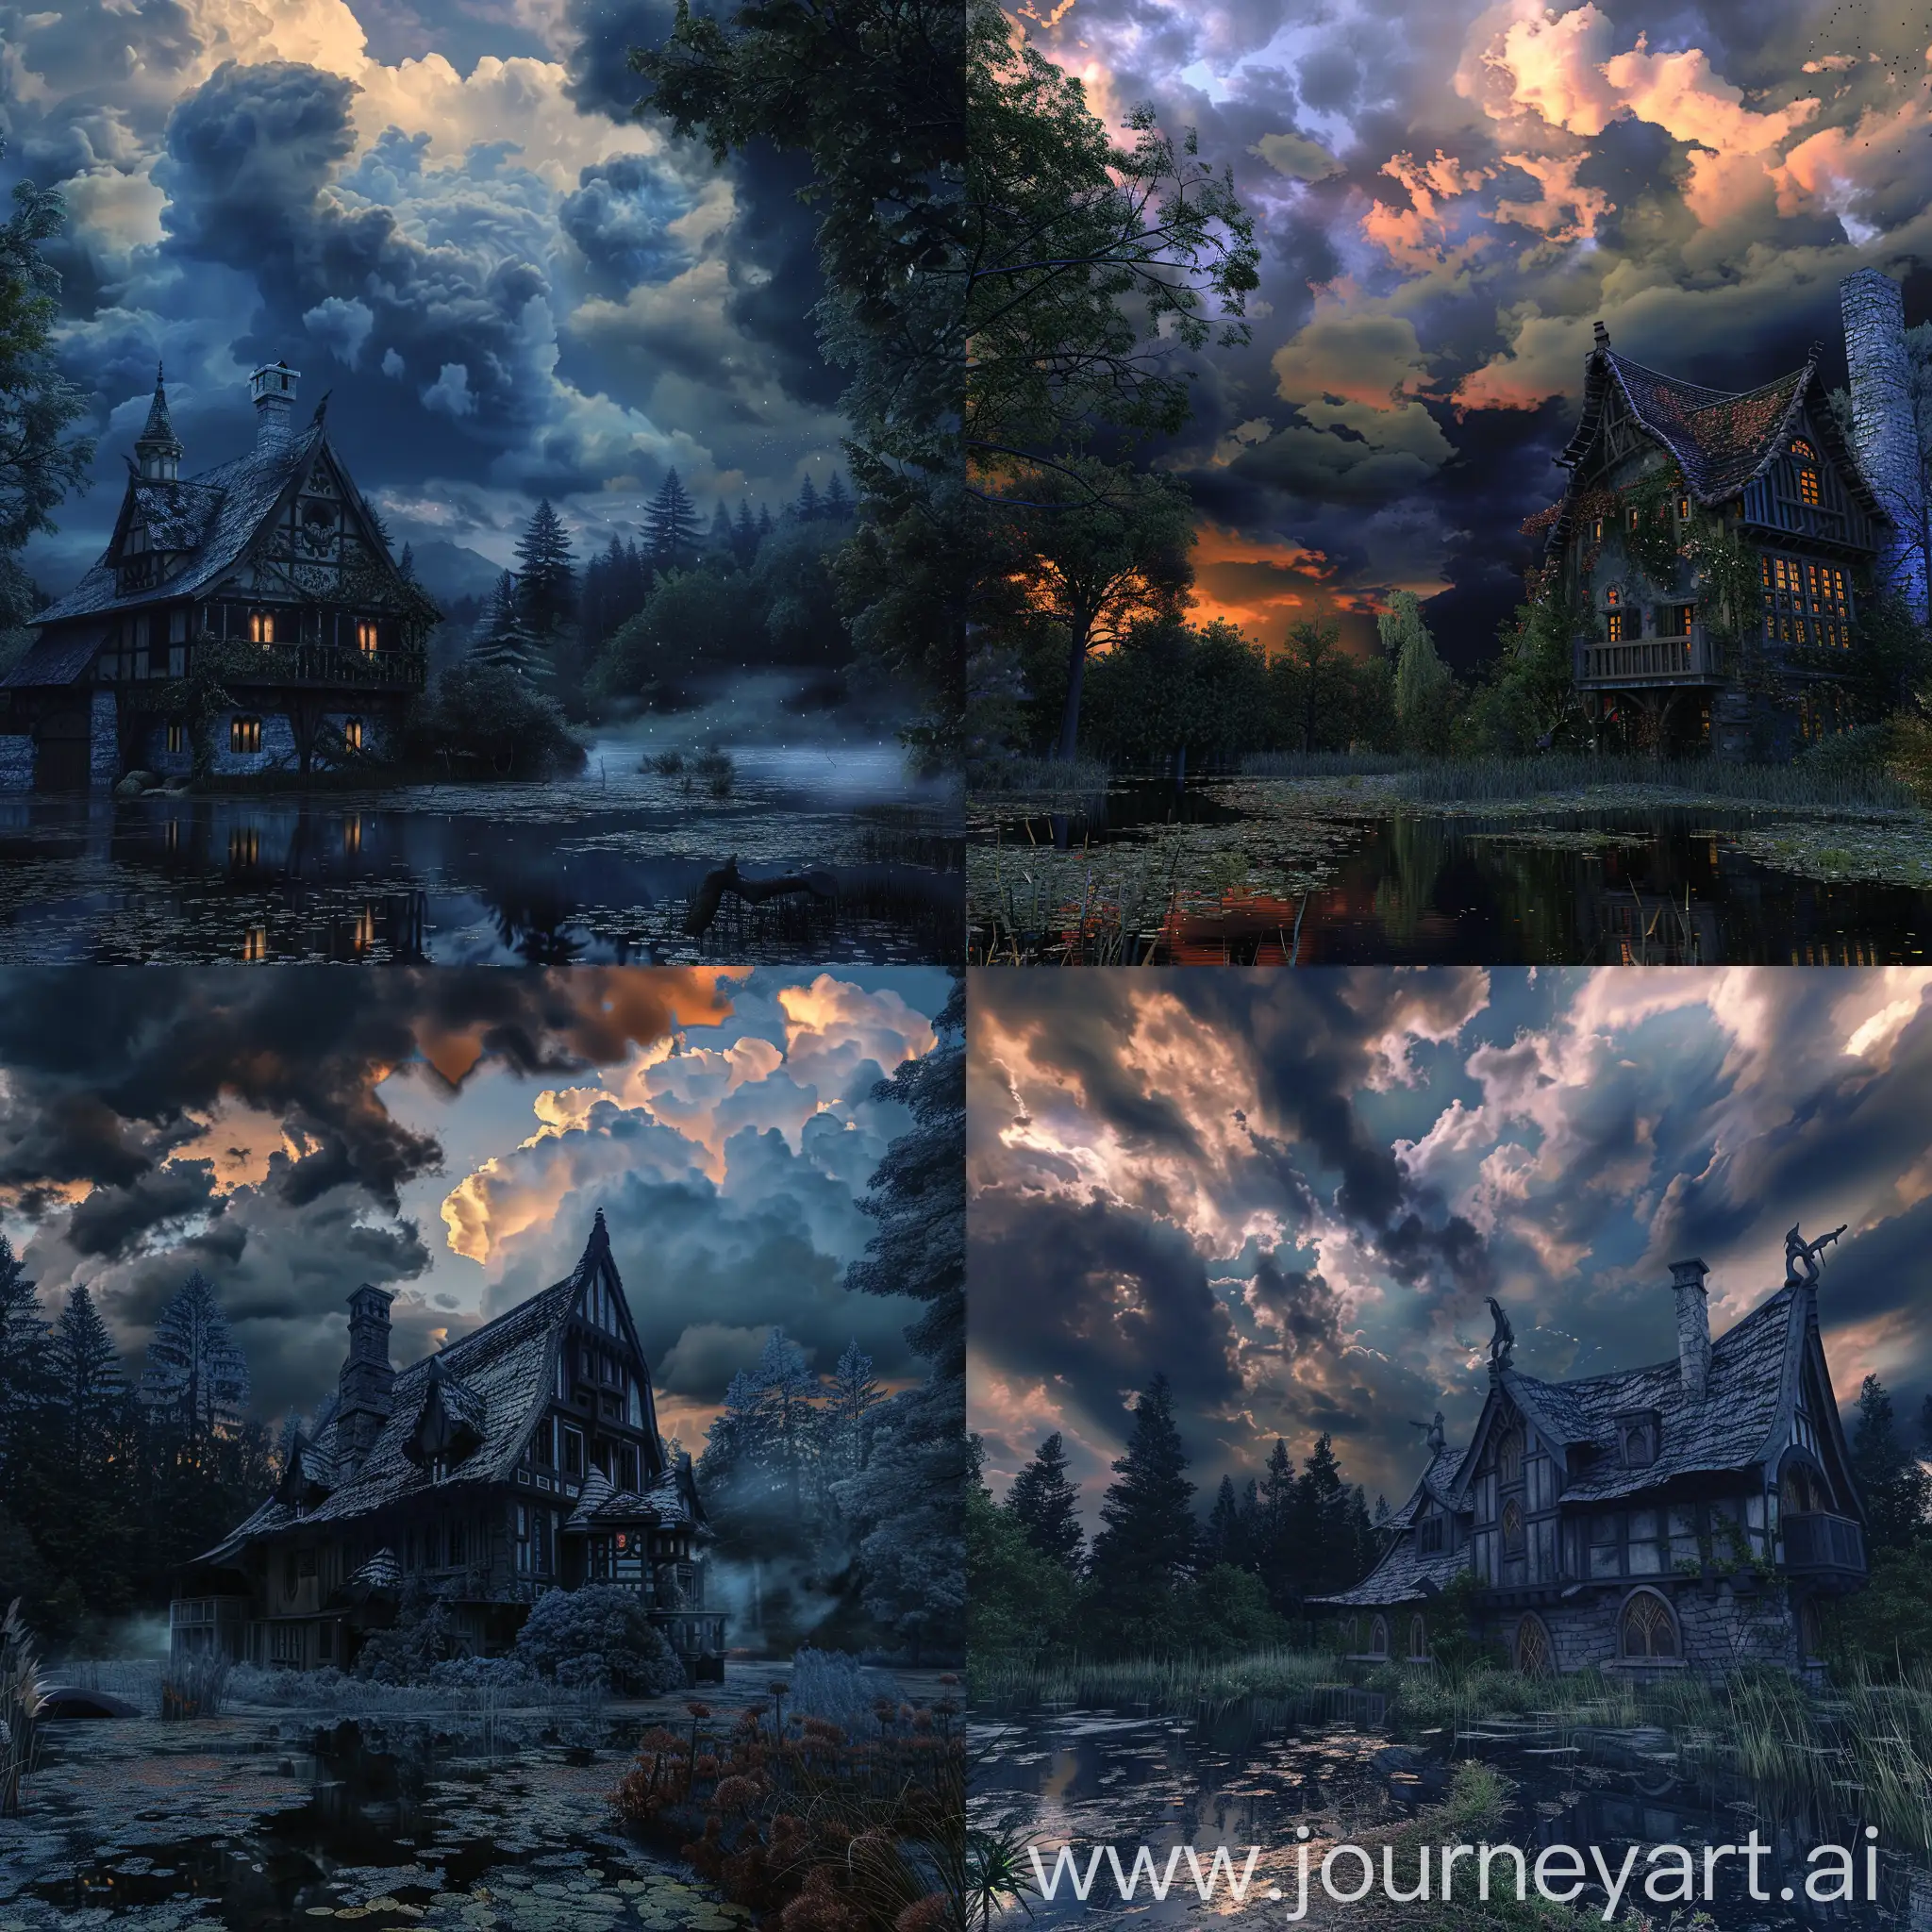 Medievalstyle-House-by-Swamp-Enchanted-Forest-Night-Scene